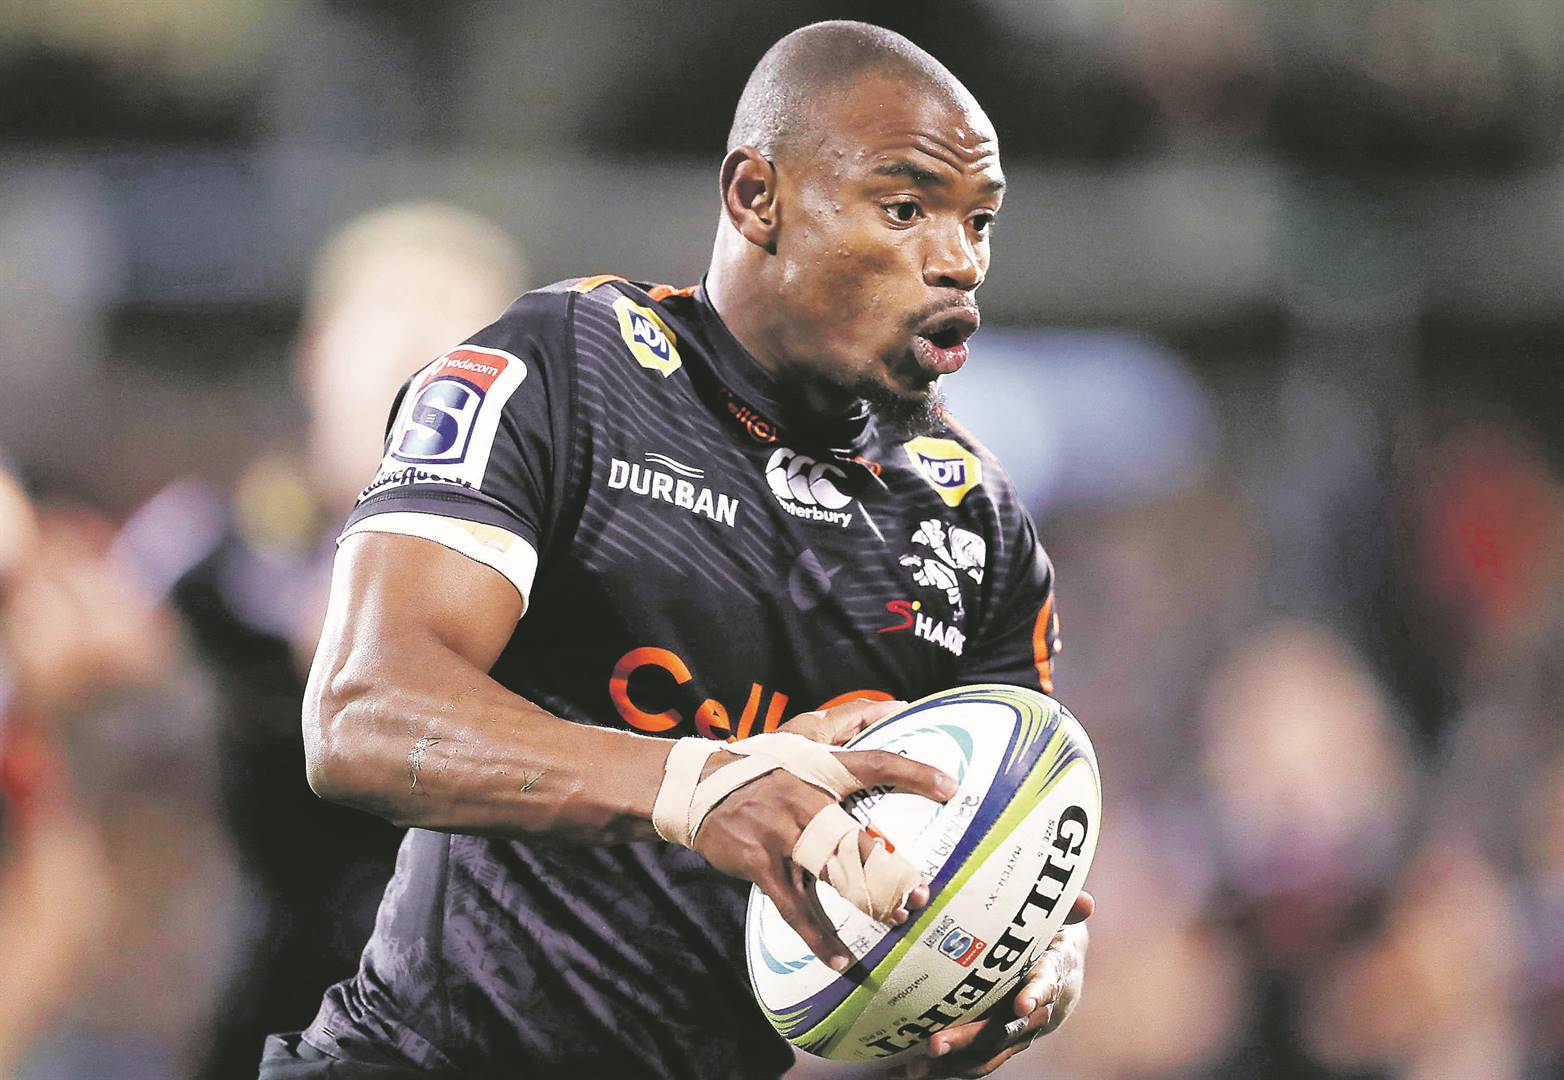 Makazole Mapimpi has been brilliant for the Sharks. Picture: Matt King / Getty Images